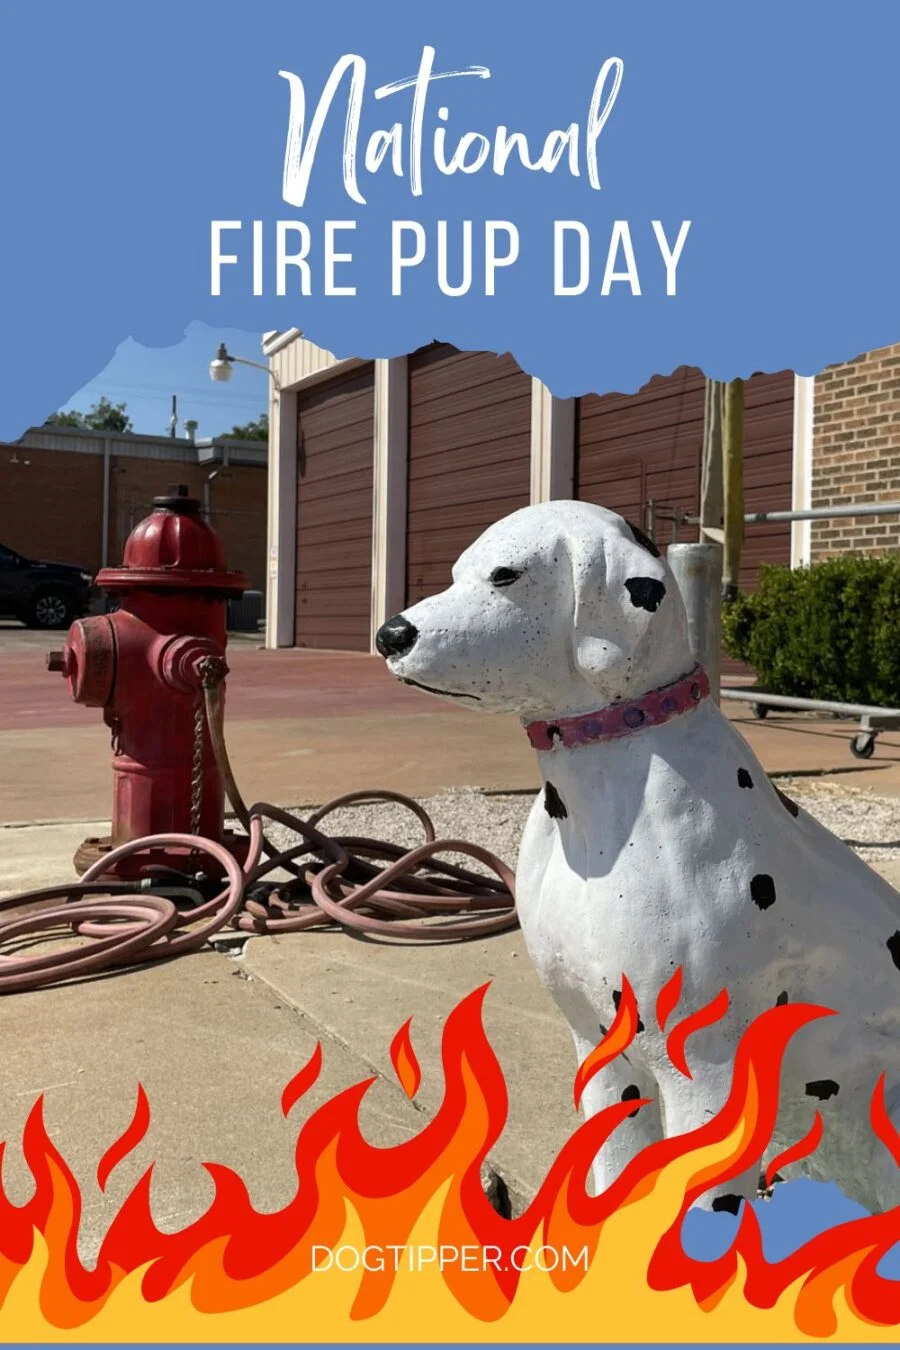 National Fire Pup Day image of Dalmatian statue in front of Hallettsville, Texas fire station